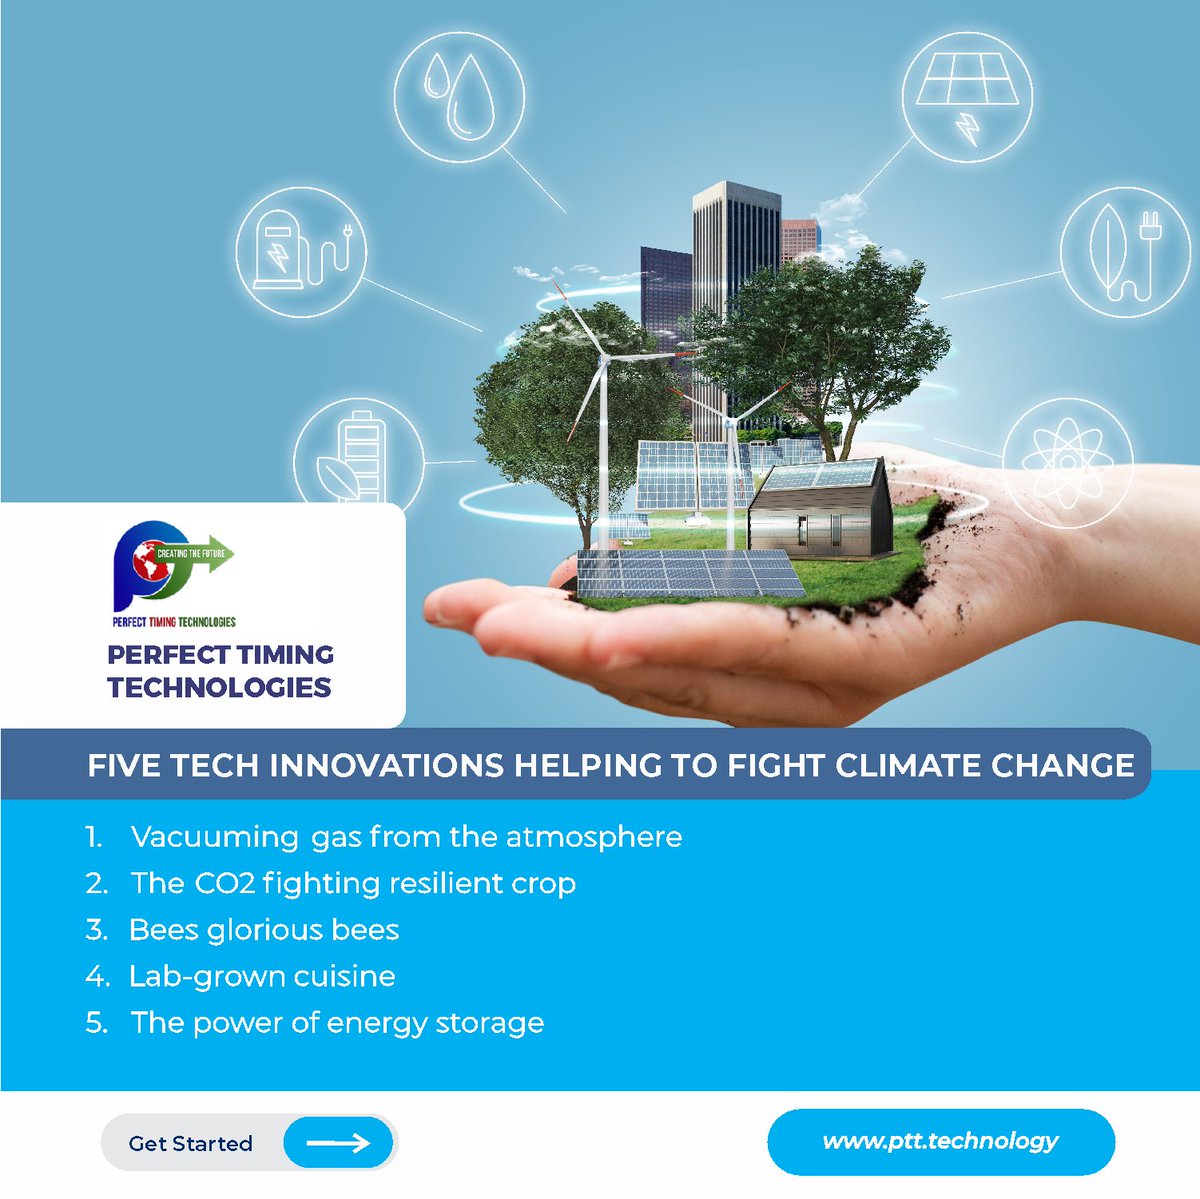 Five tech innovations helping to fight climate change
Read Here: kaspersky.com/blog/secure-fu…

#TechInnovations #ClimateChange #GreenTech #Sustainability #RenewableEnergy #EnvironmentalTech #EcoFriendlyTech  #GreenSolutions #PerfectTimingTechnologies #PerfectTimingHolding